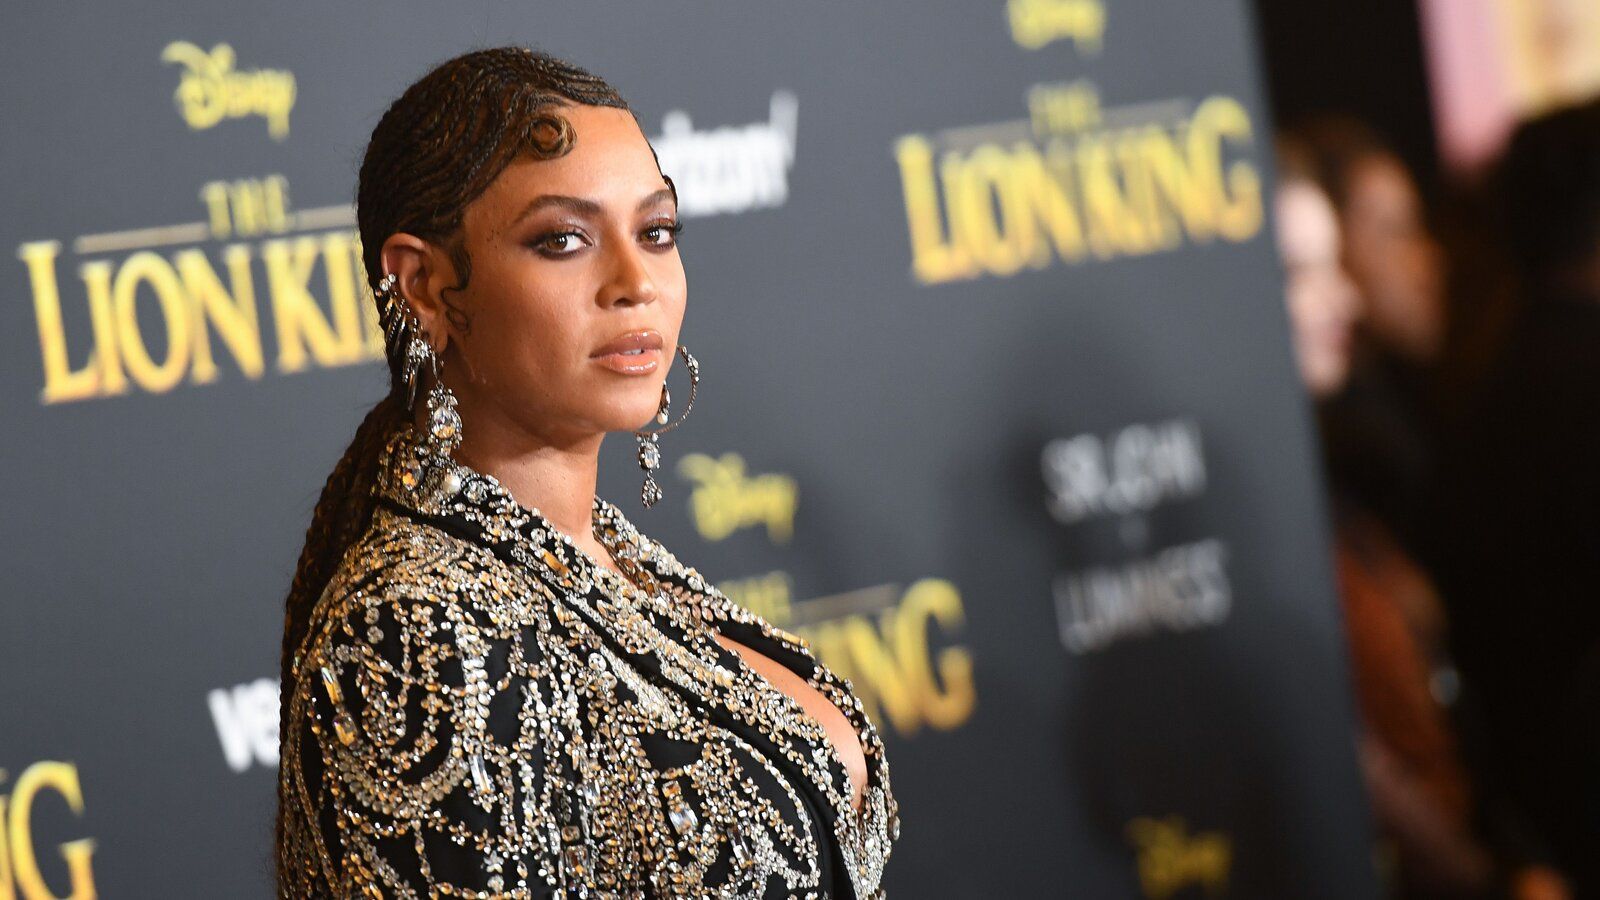 Beyoncé's 'Black Is King' Is No Secret, but Still Comes With Mystery